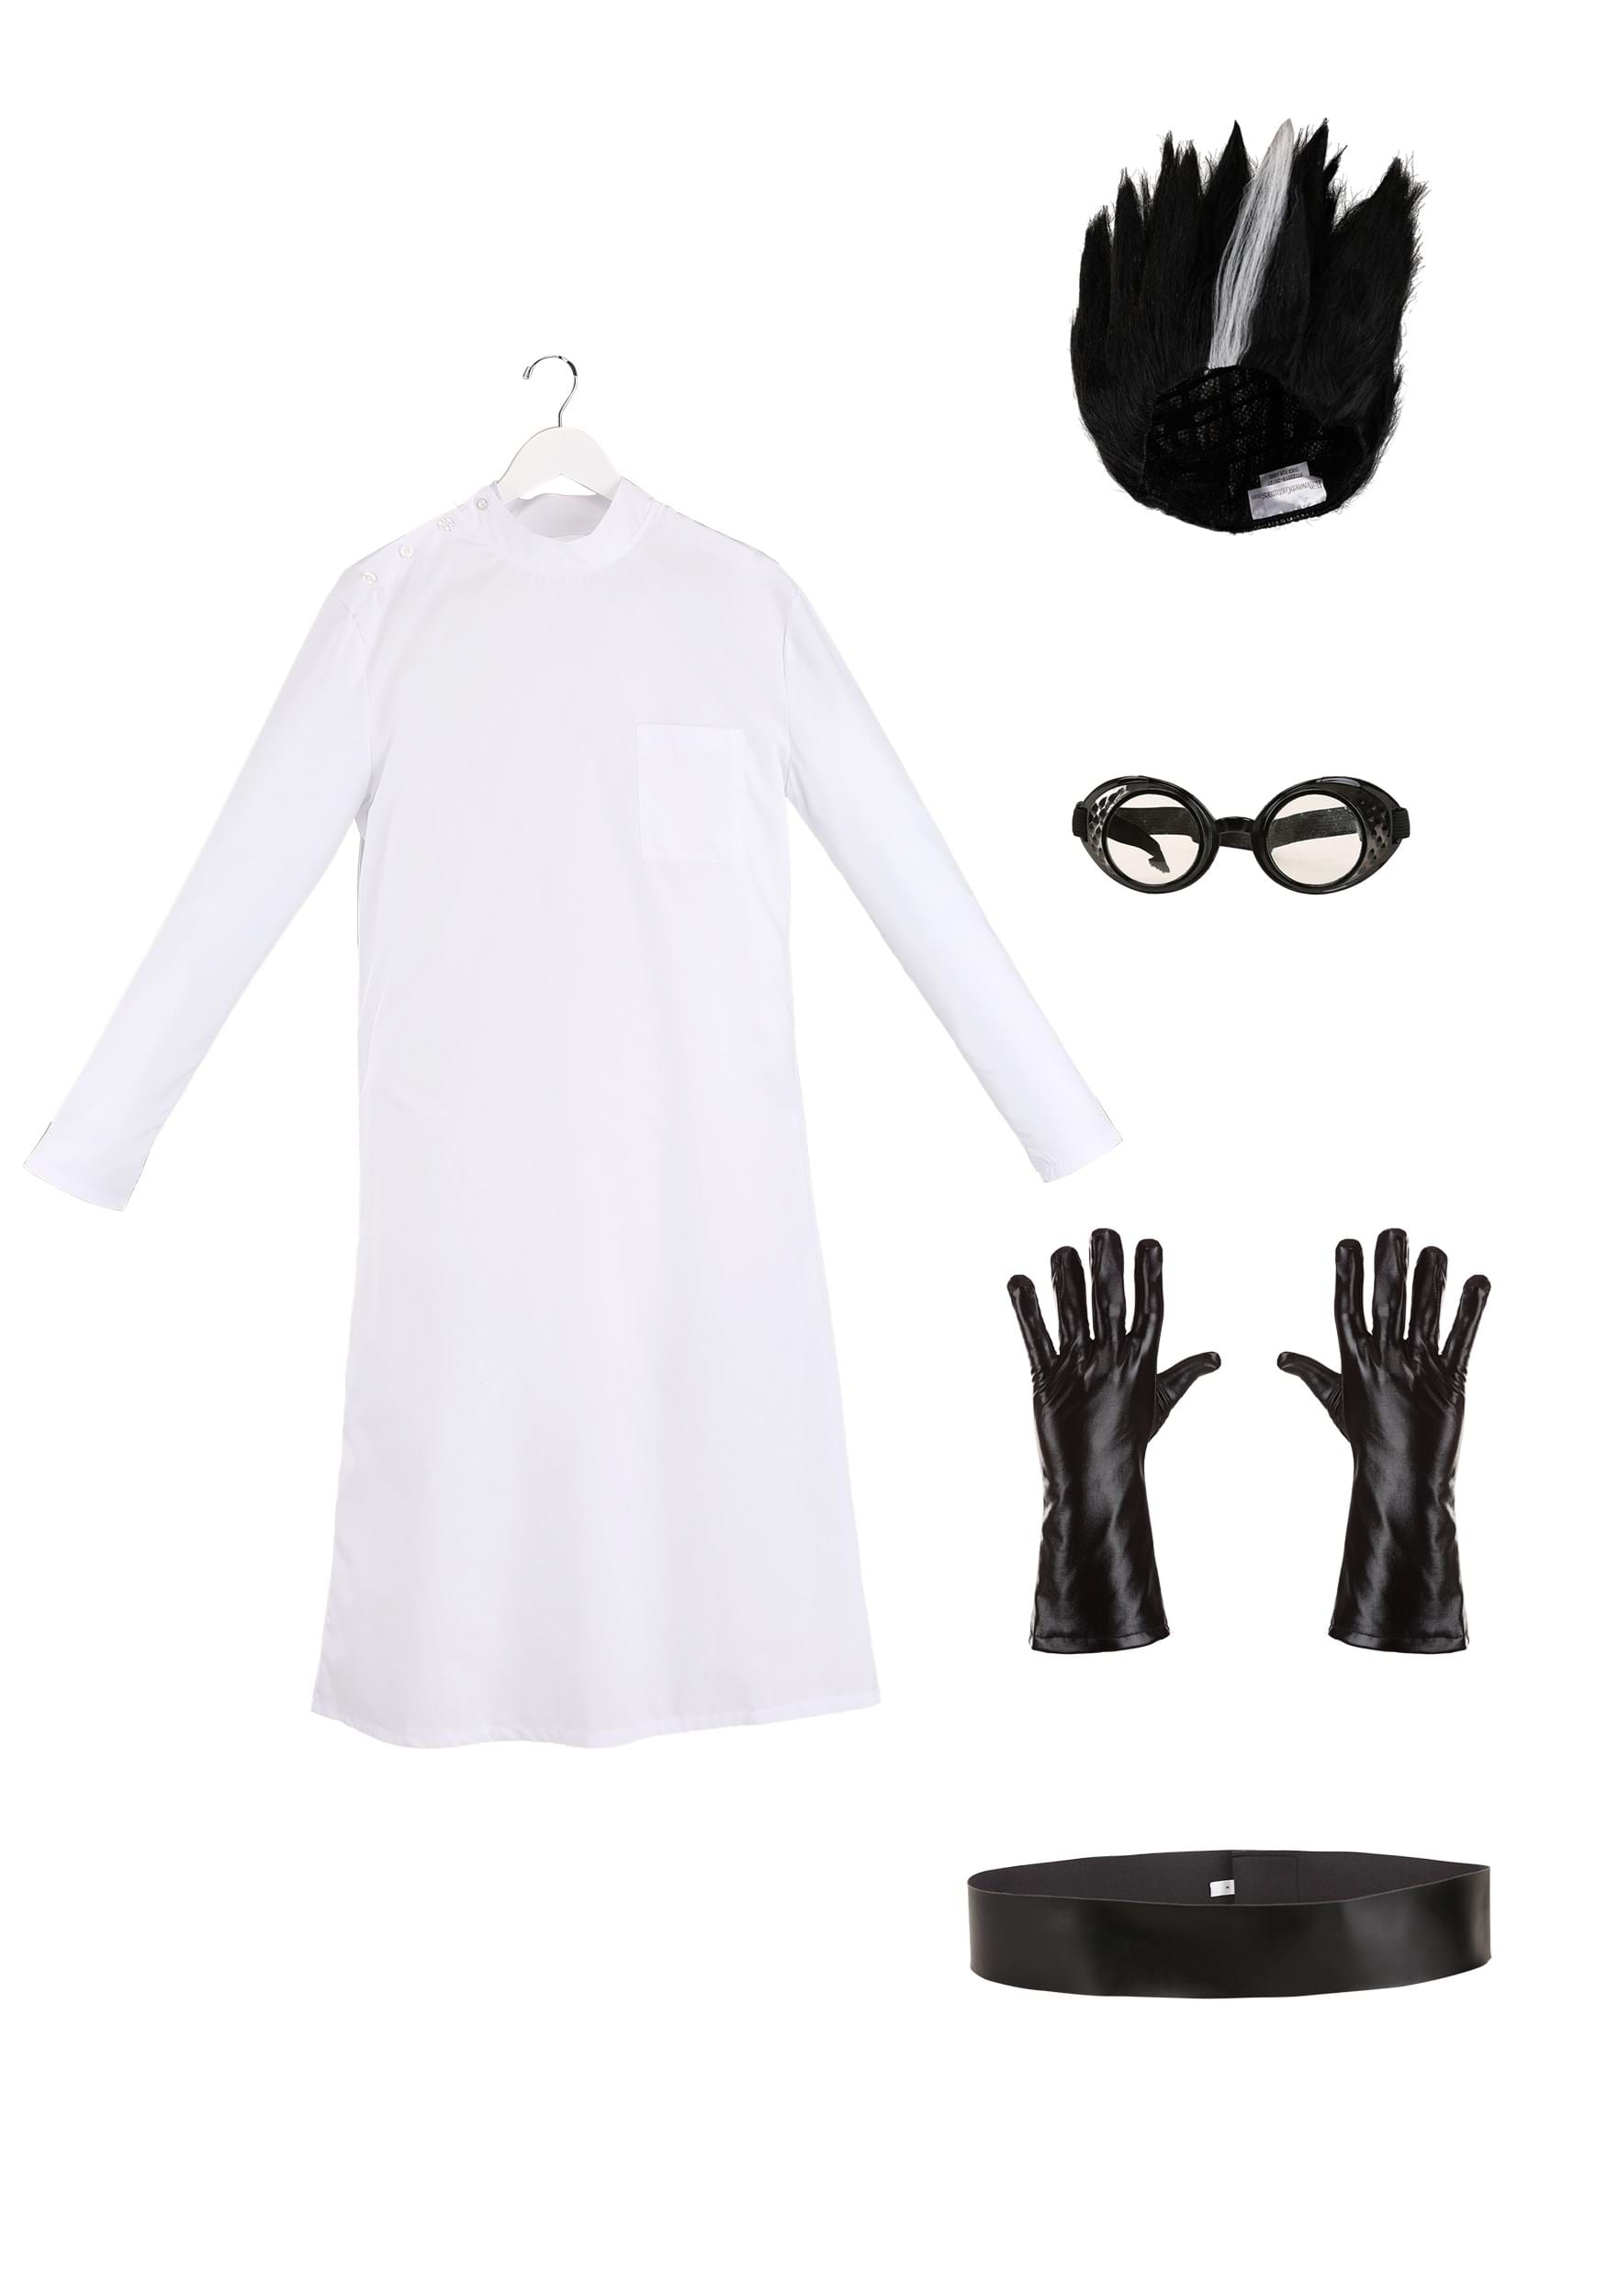 Deluxe Mad Scientist Costume For Adults